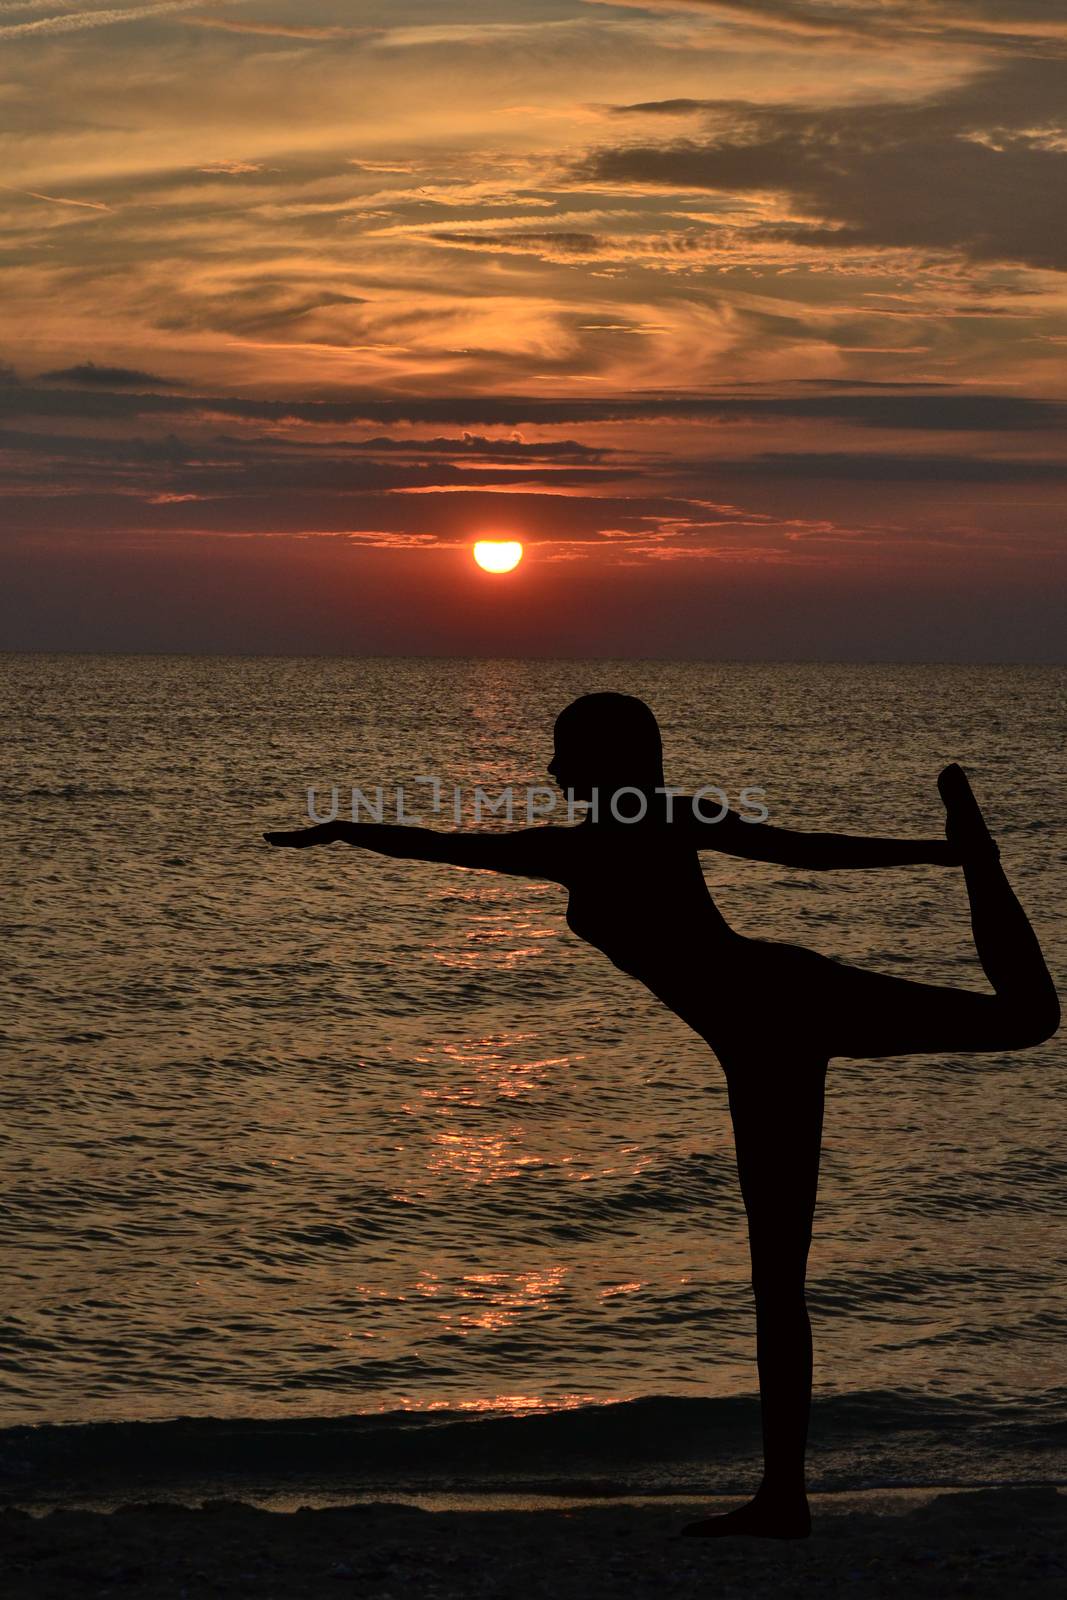 Warrior pose from yoga by woman silhouette by hibrida13